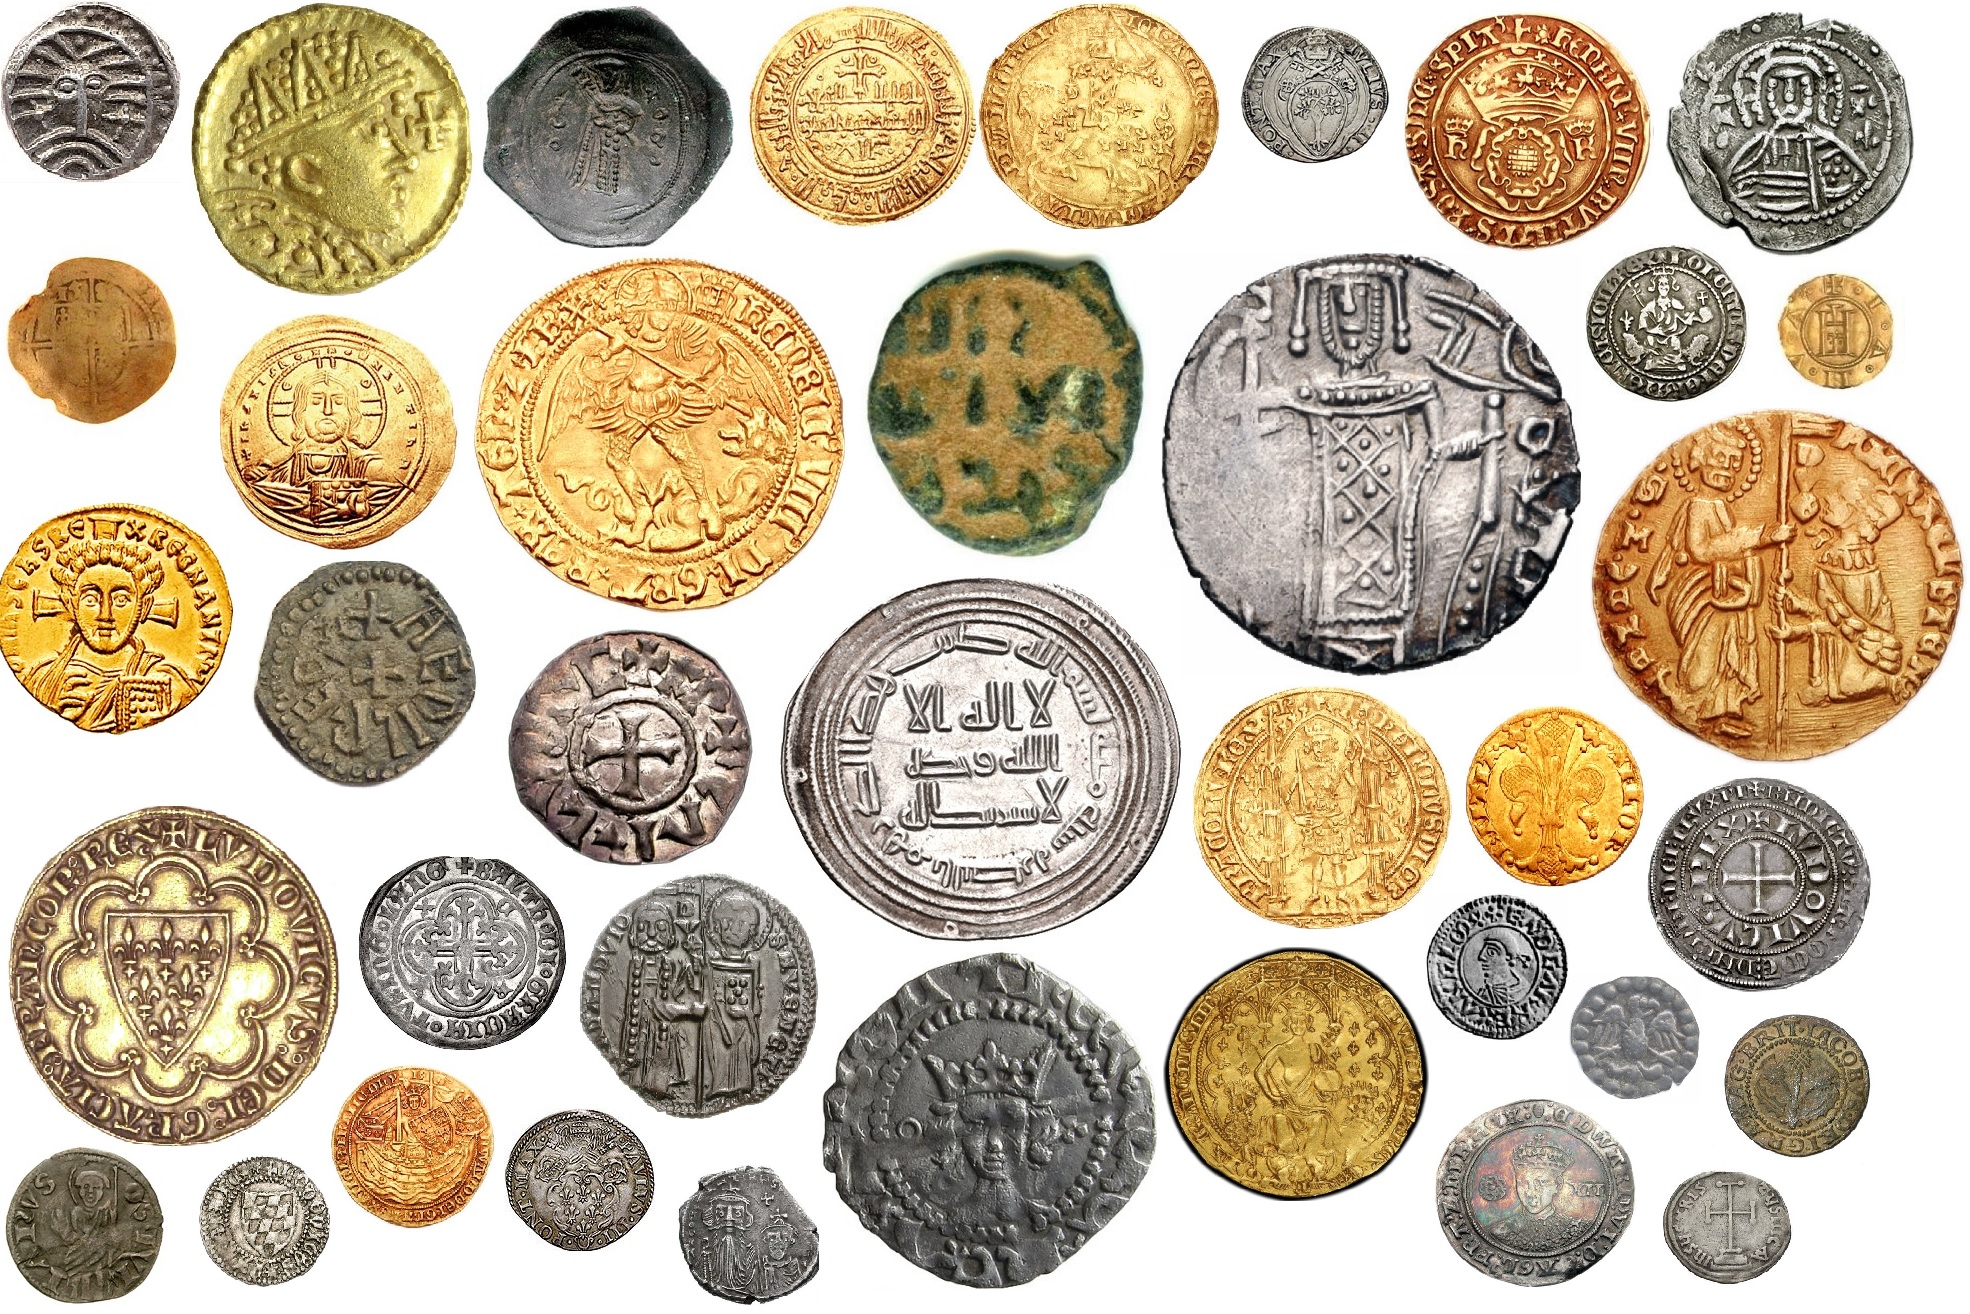 Common Names of British Coin Denominations | Chards